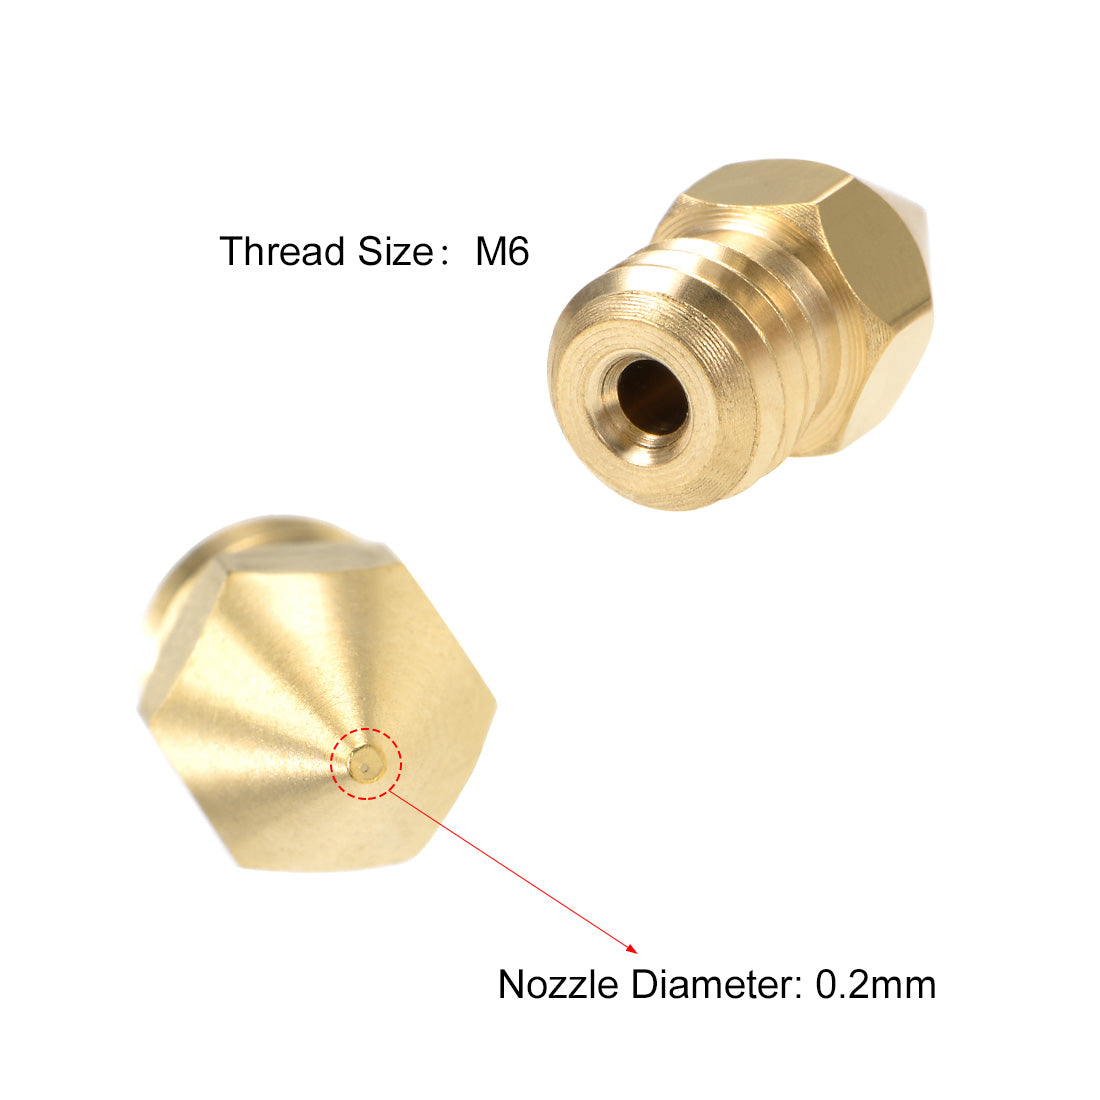 uxcell Uxcell 0.2mm 3D Printer Nozzle Head M6 Thread Replacement for MK8 1.75mm Extruder Print, Brass 10pcs